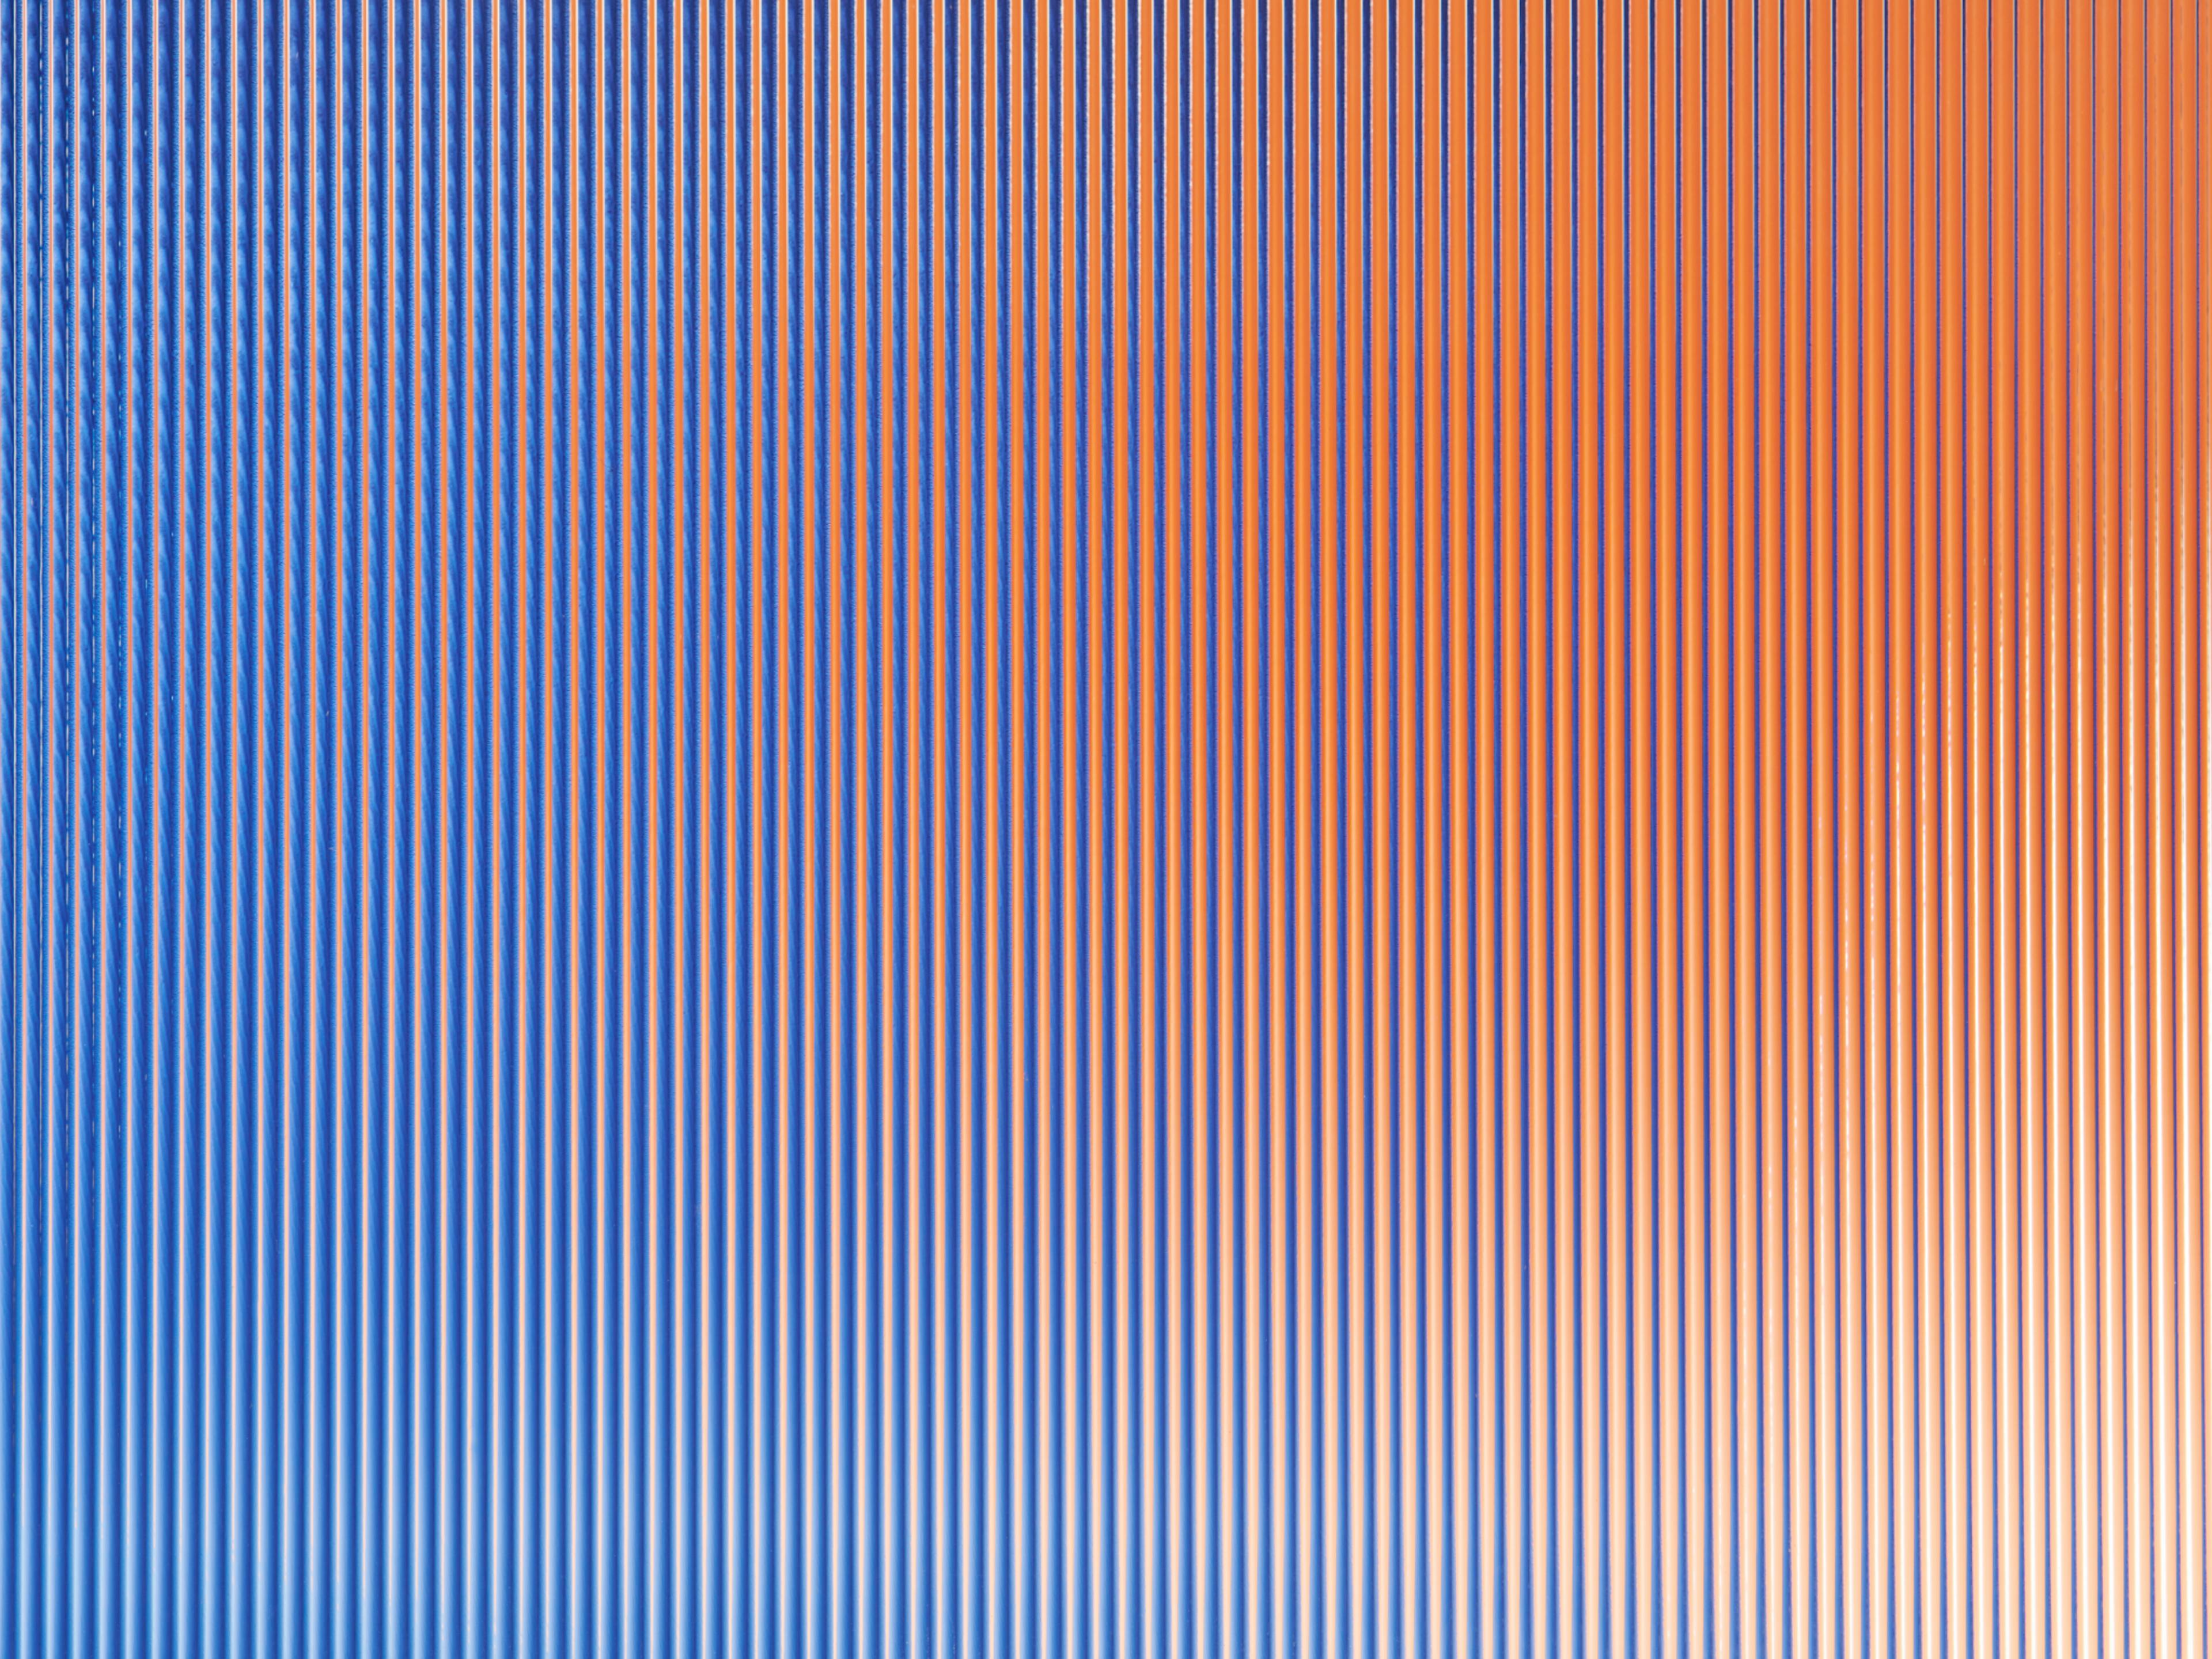 abstract gradient